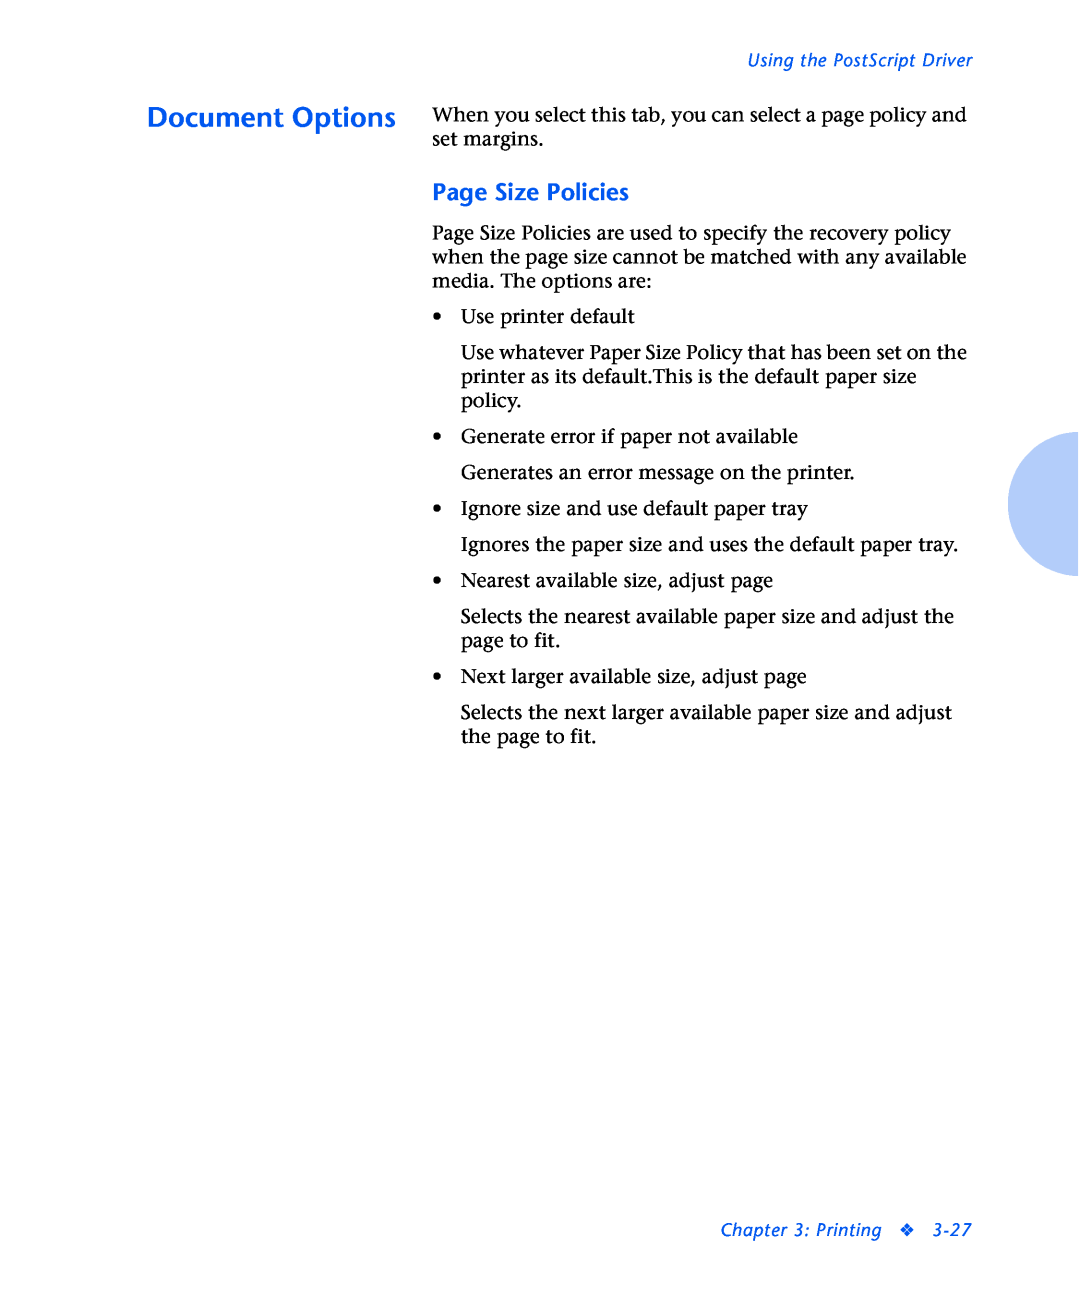 Xerox N2125 manual Page Size Policies 